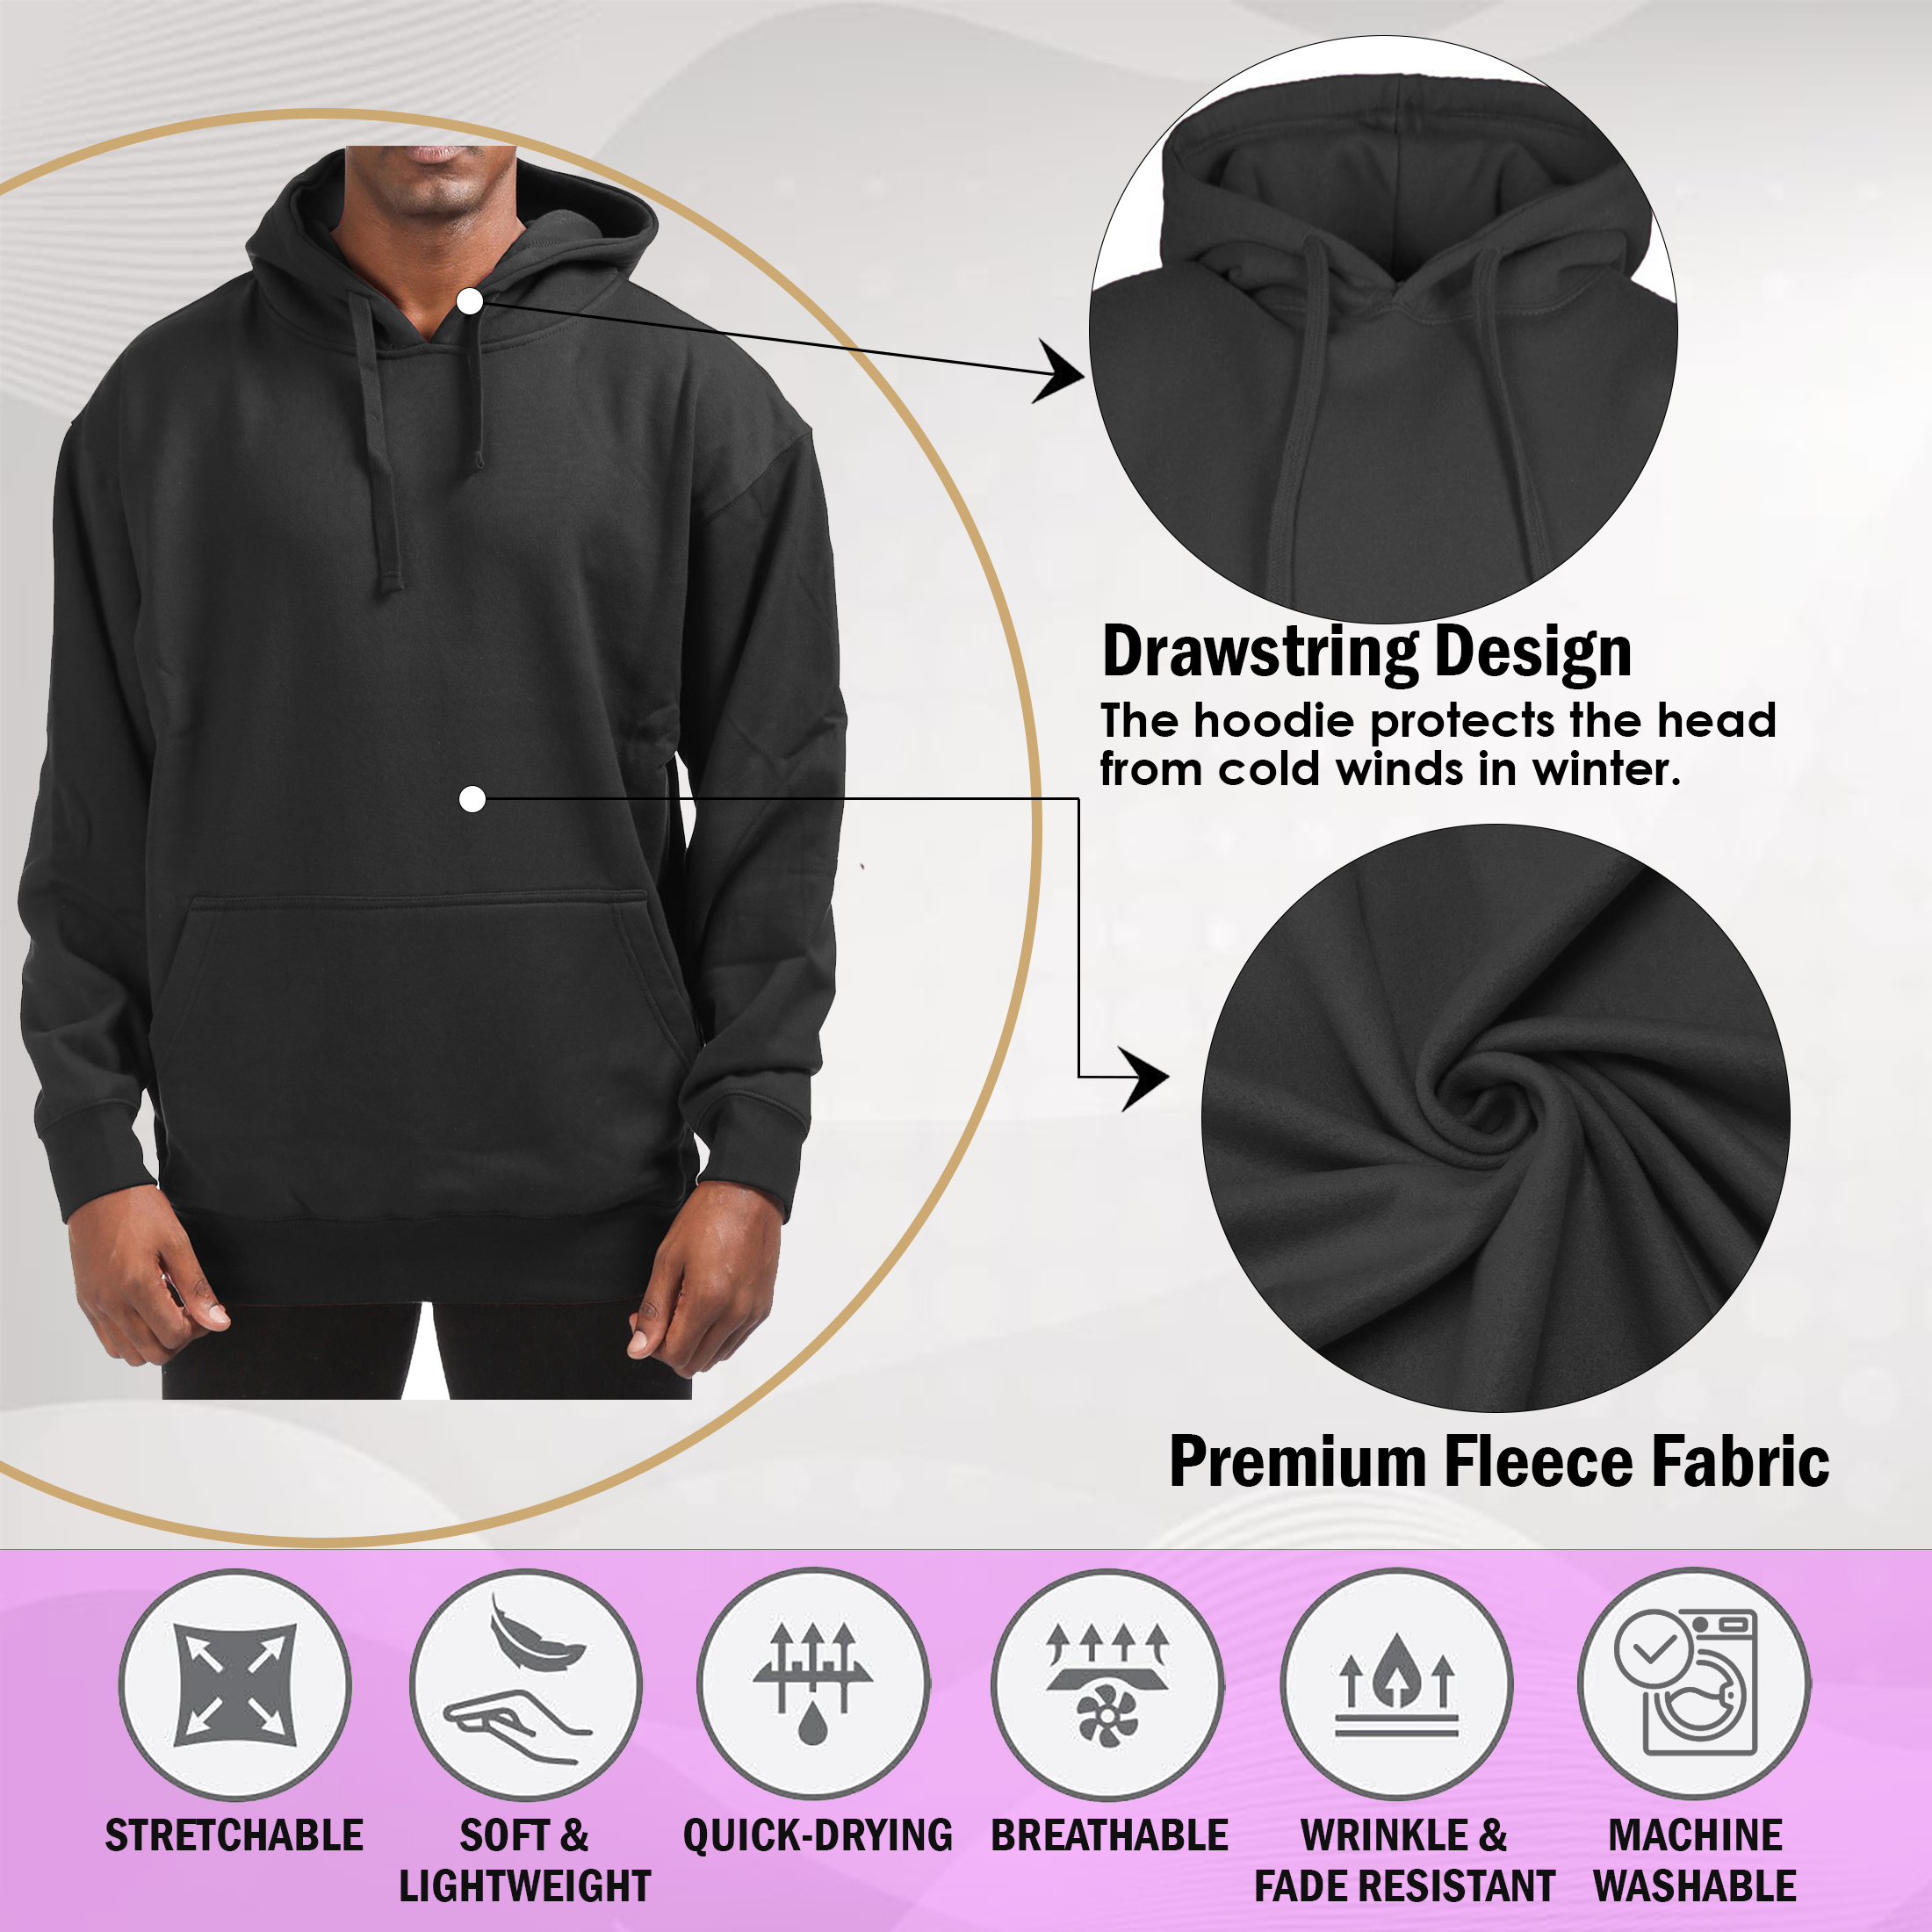 Men's Cotton-Blend Fleece Pullover Hoodie With Pocket (Big & Tall Sizes Available) - Olive, Medium